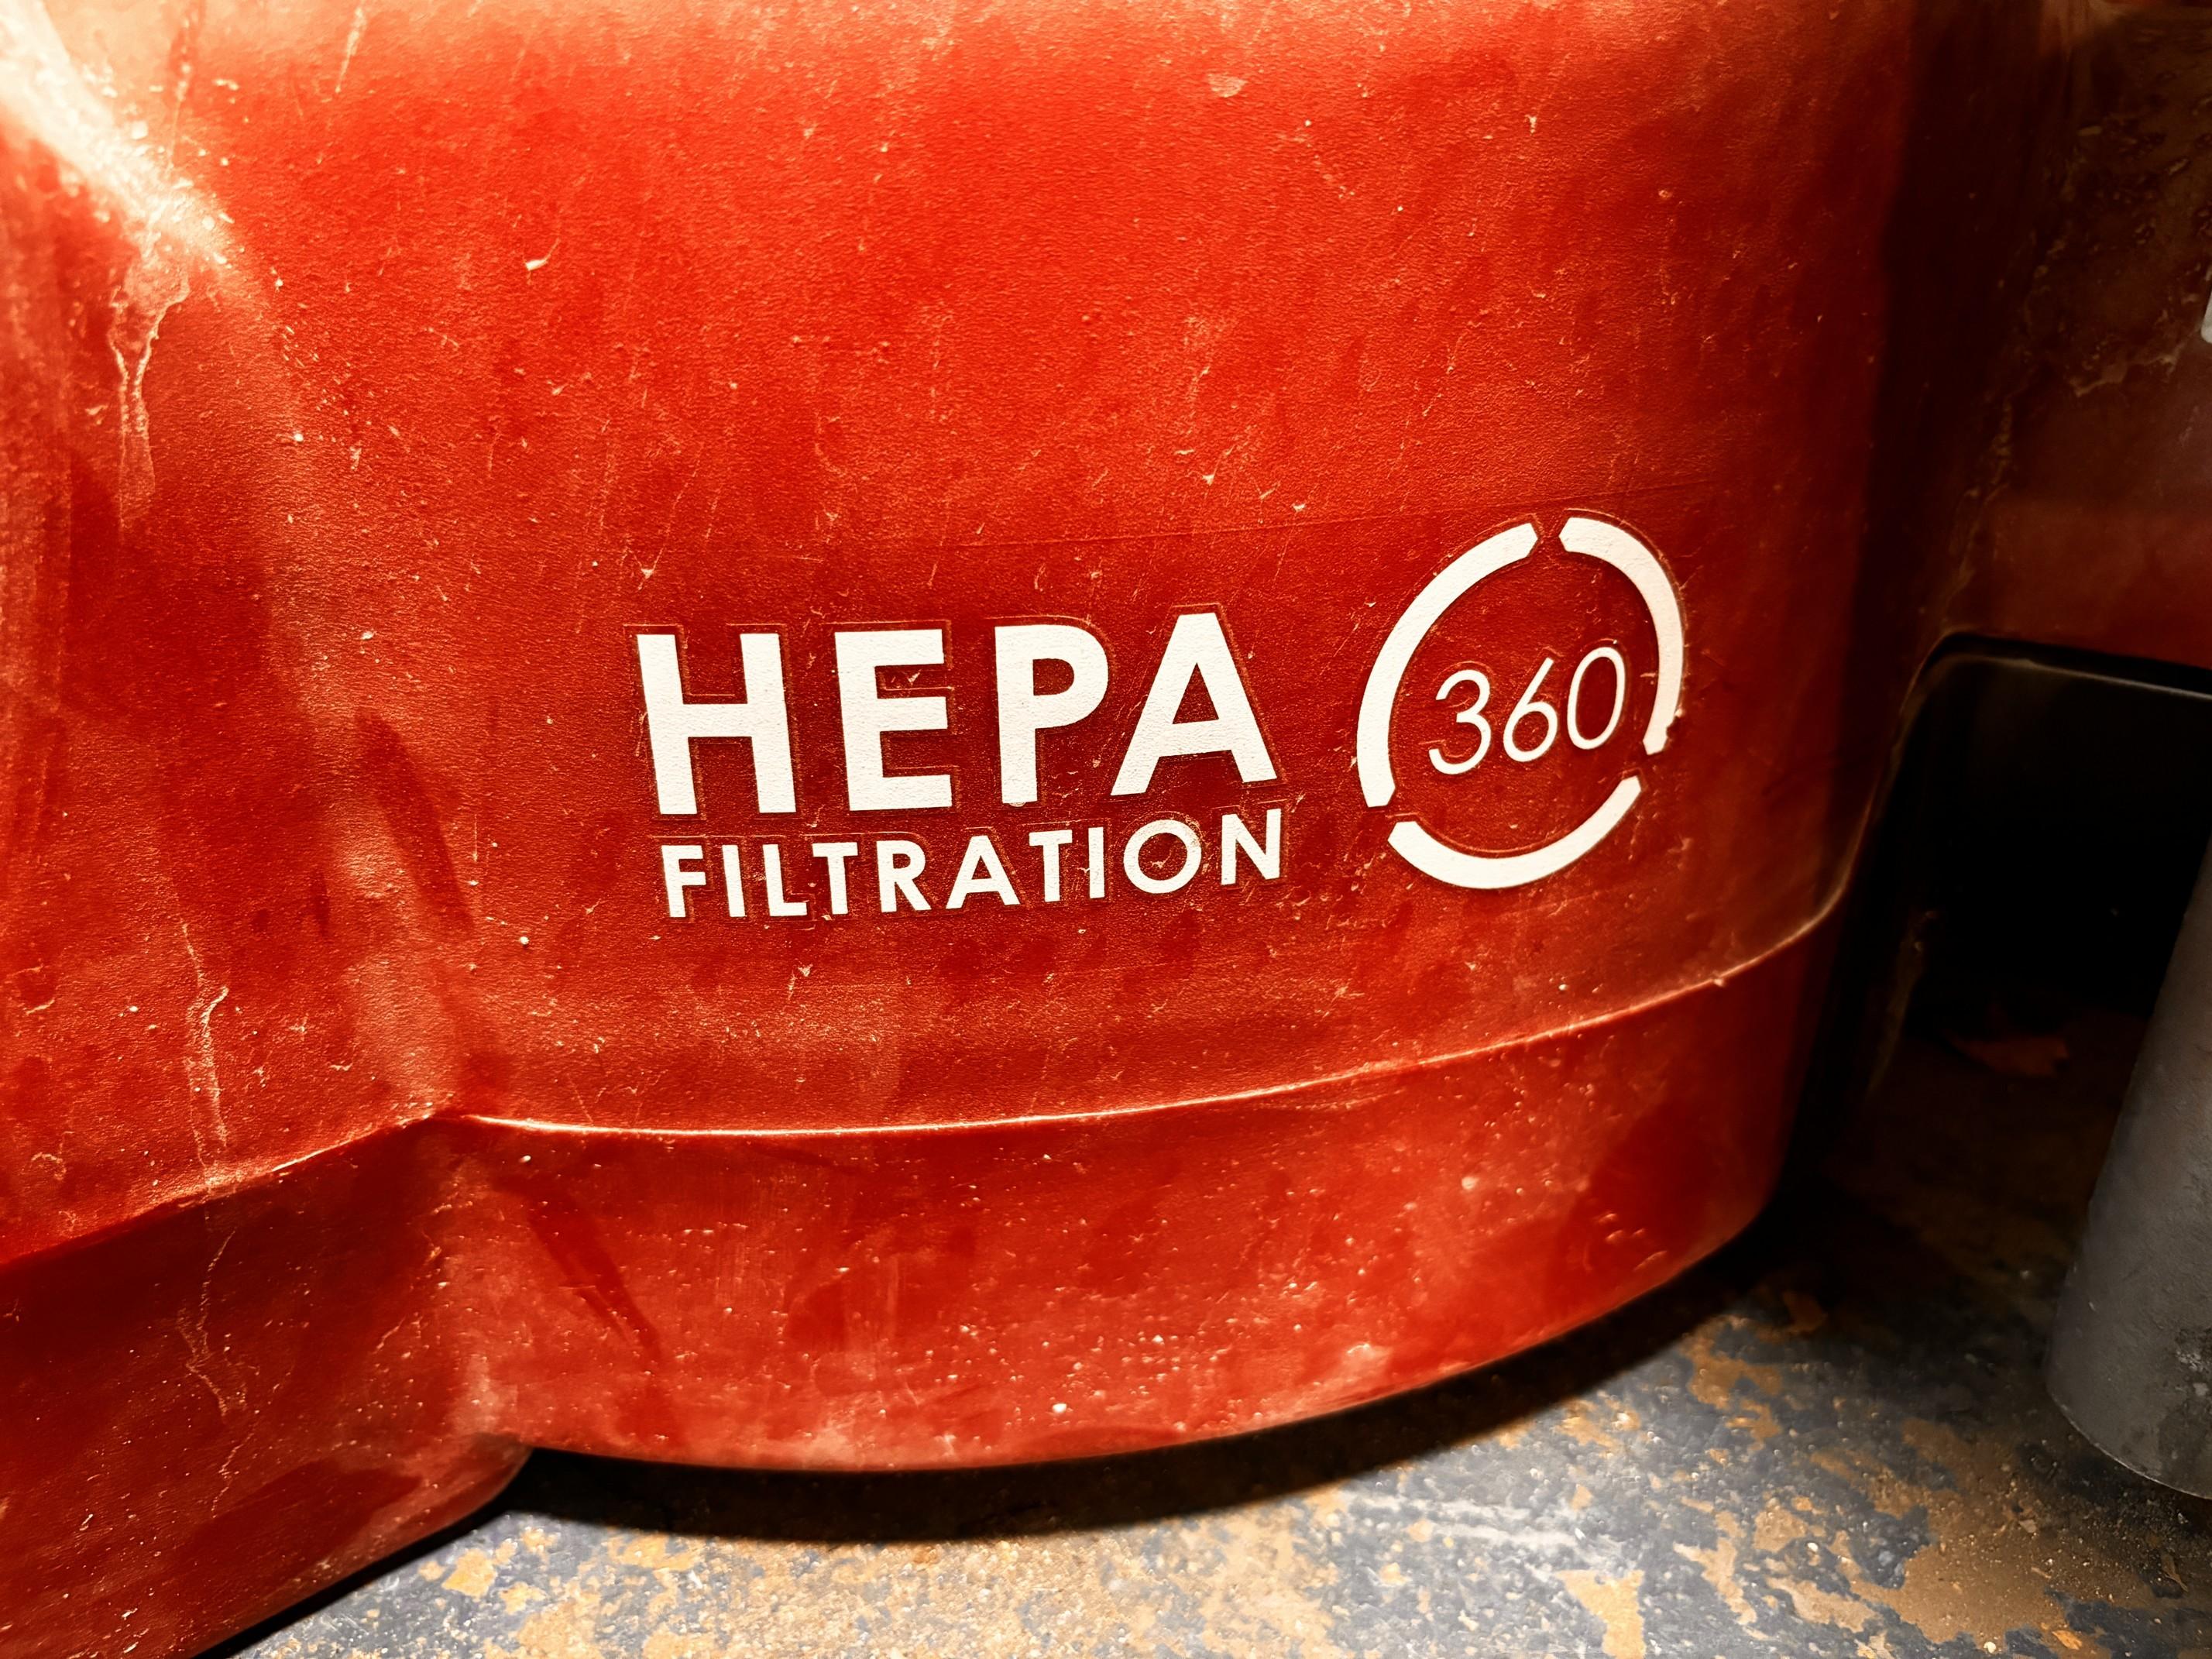 BUILDCLEAN Dust Collection System - HEPA Filtration System